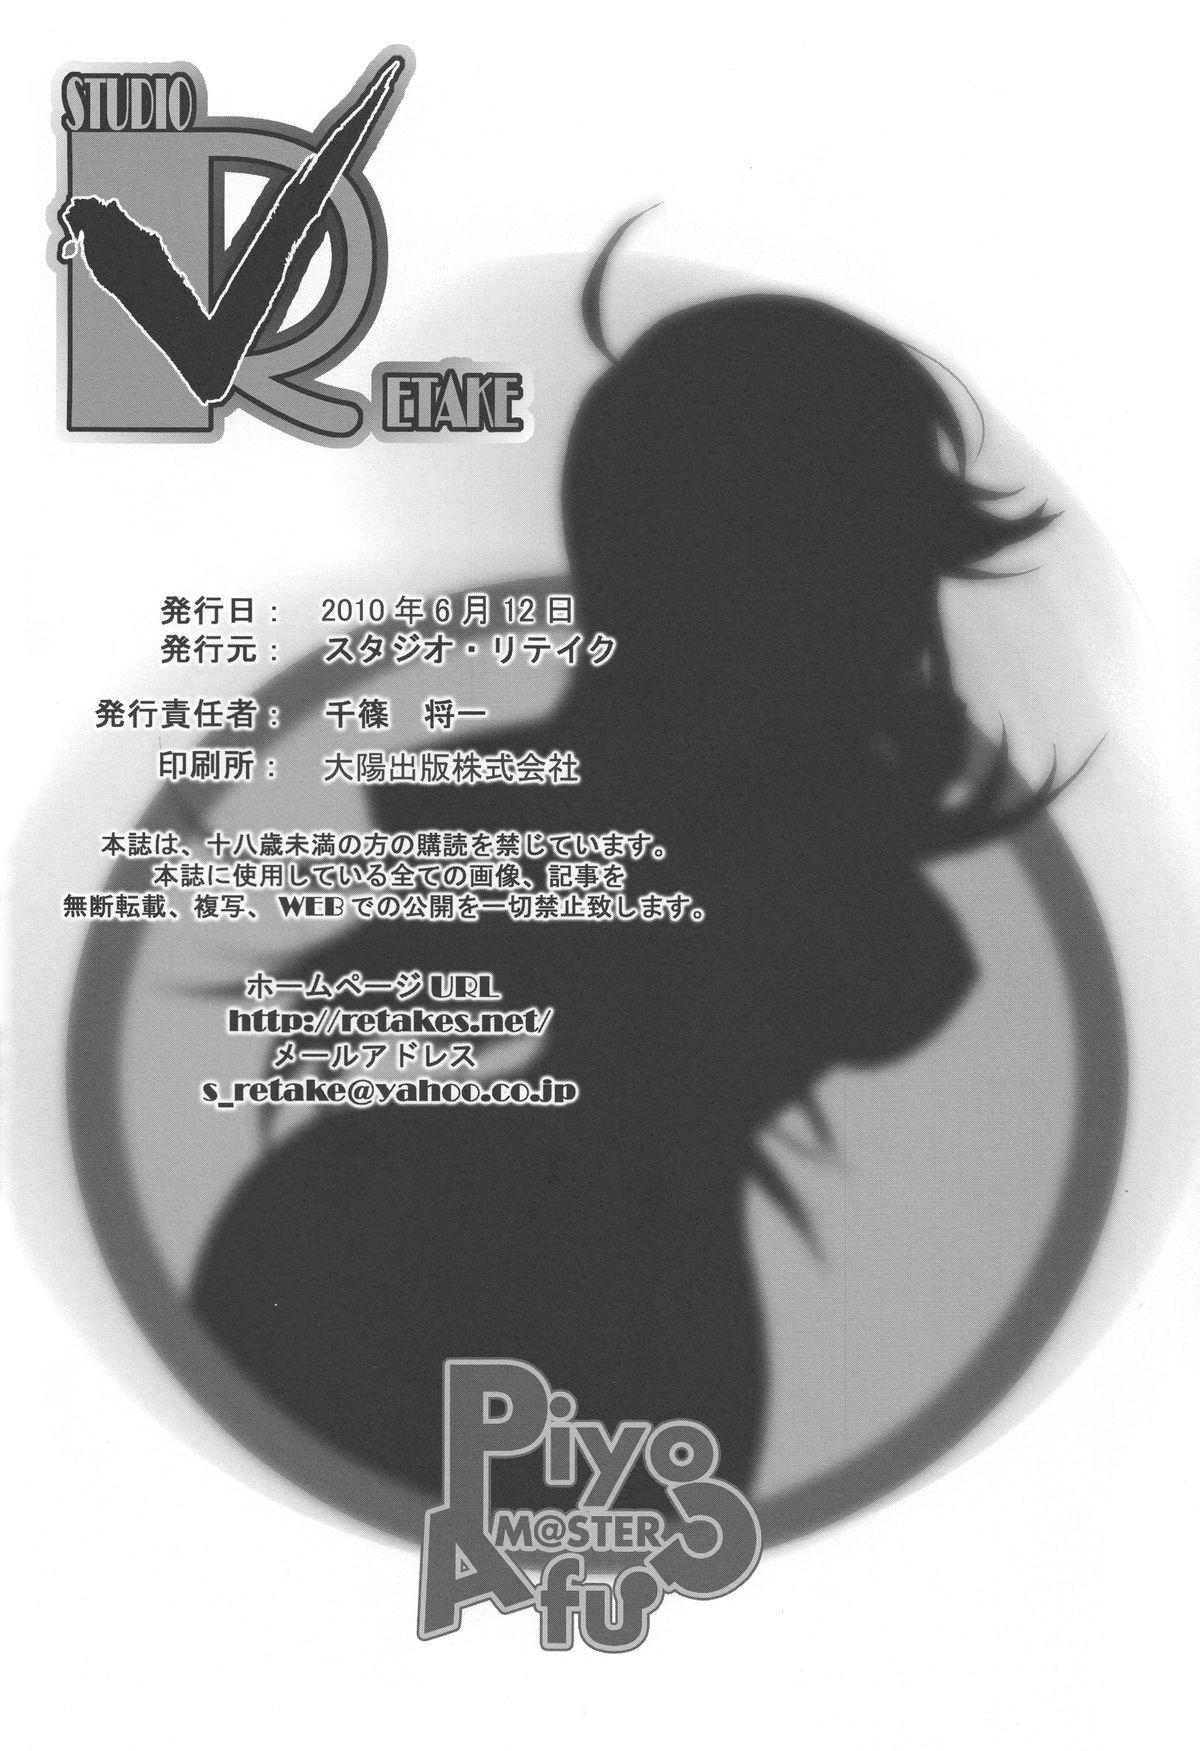 Cams PiyoAfu?M@STER - The idolmaster Mujer - Page 27